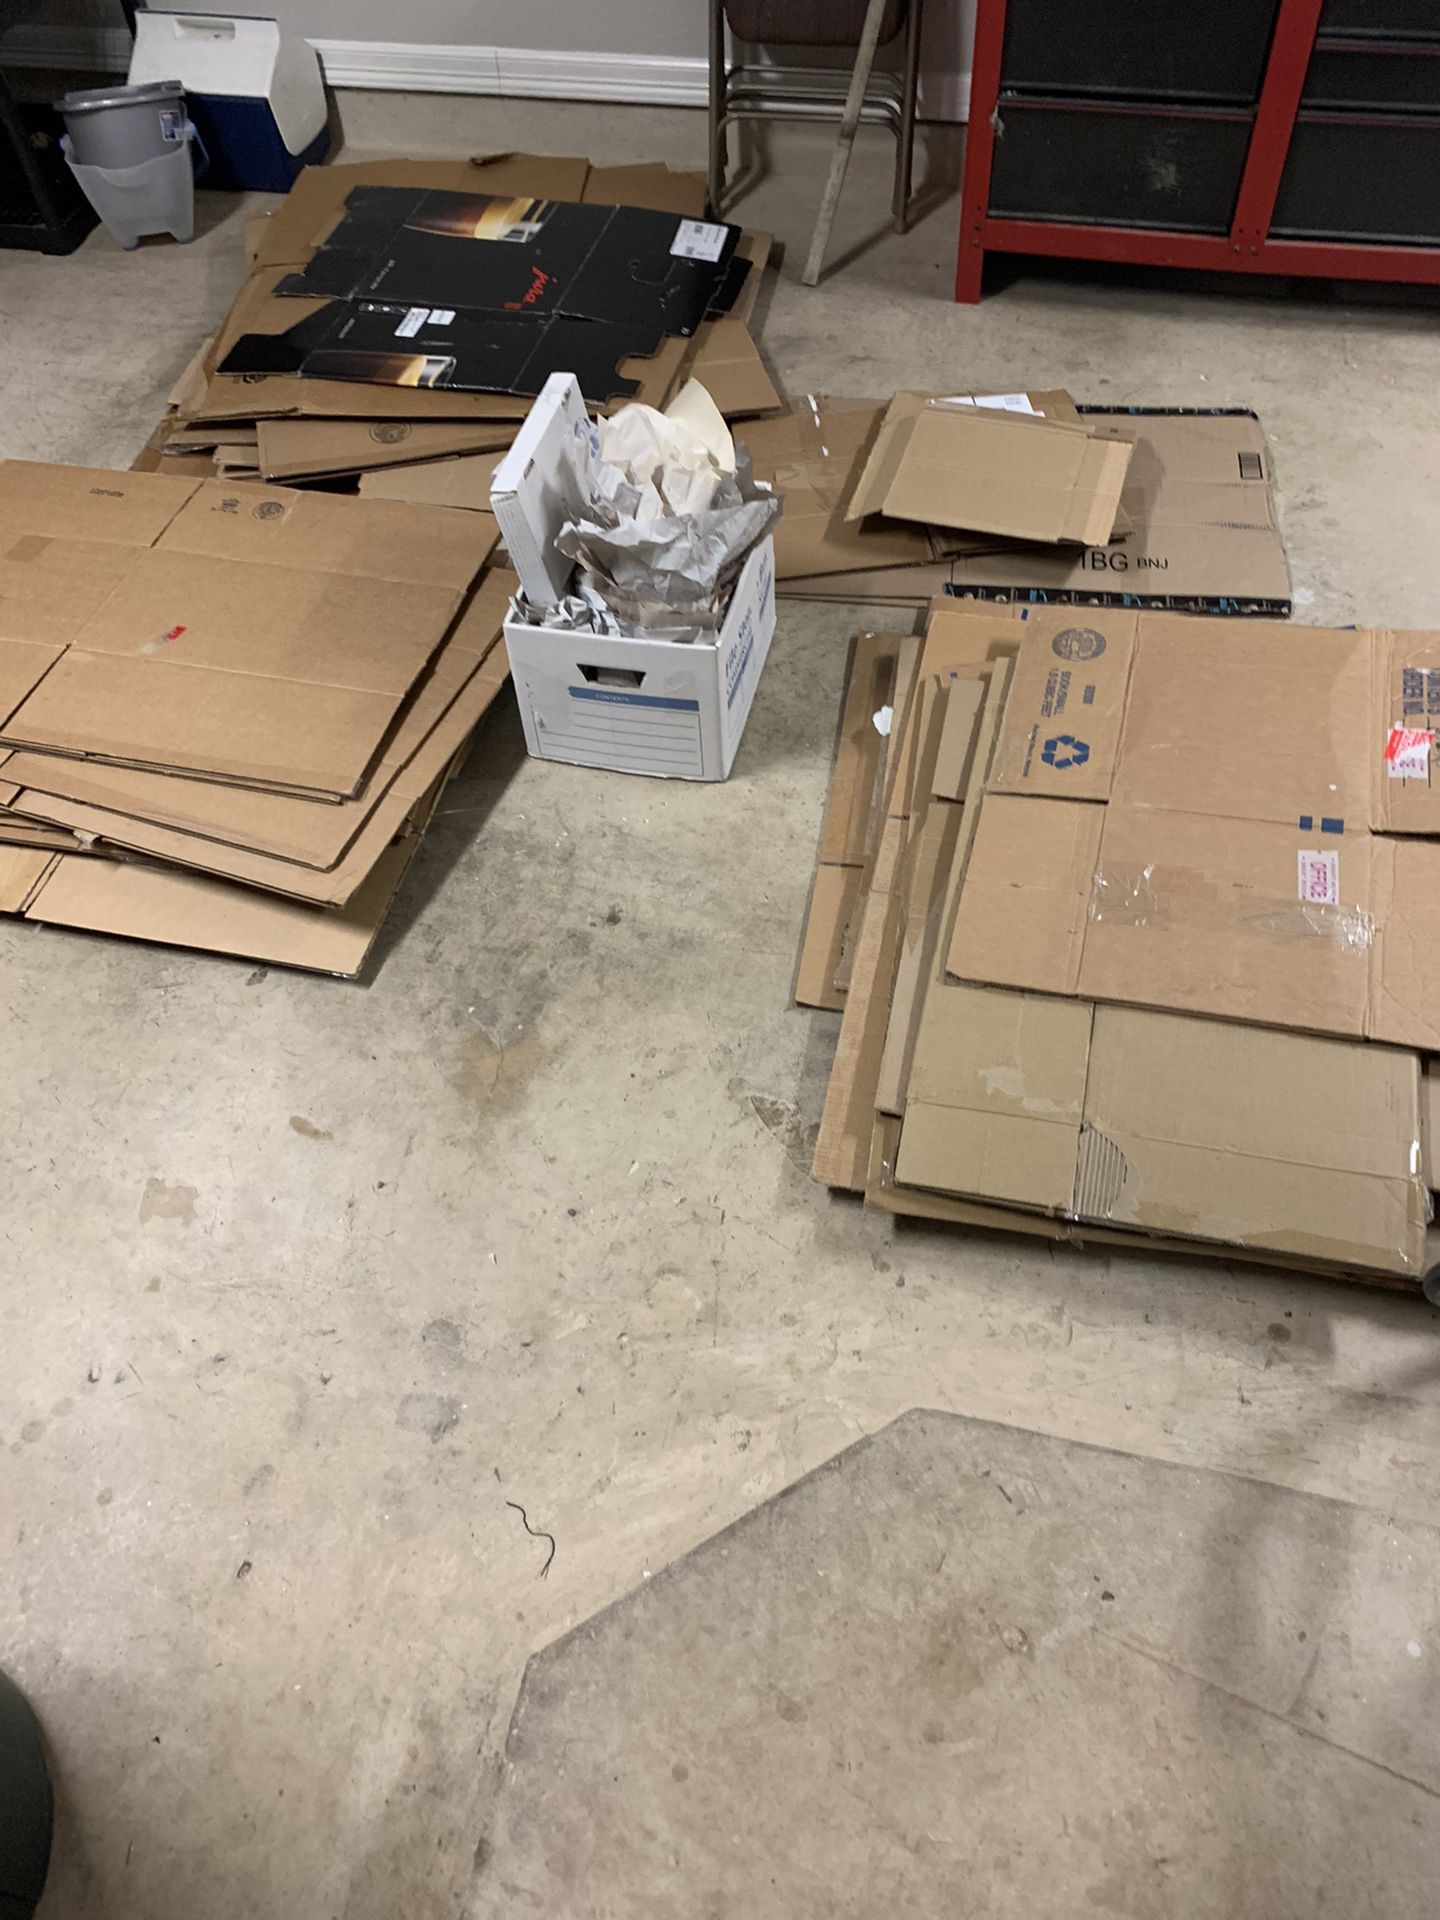 Anyone have free moving boxes?